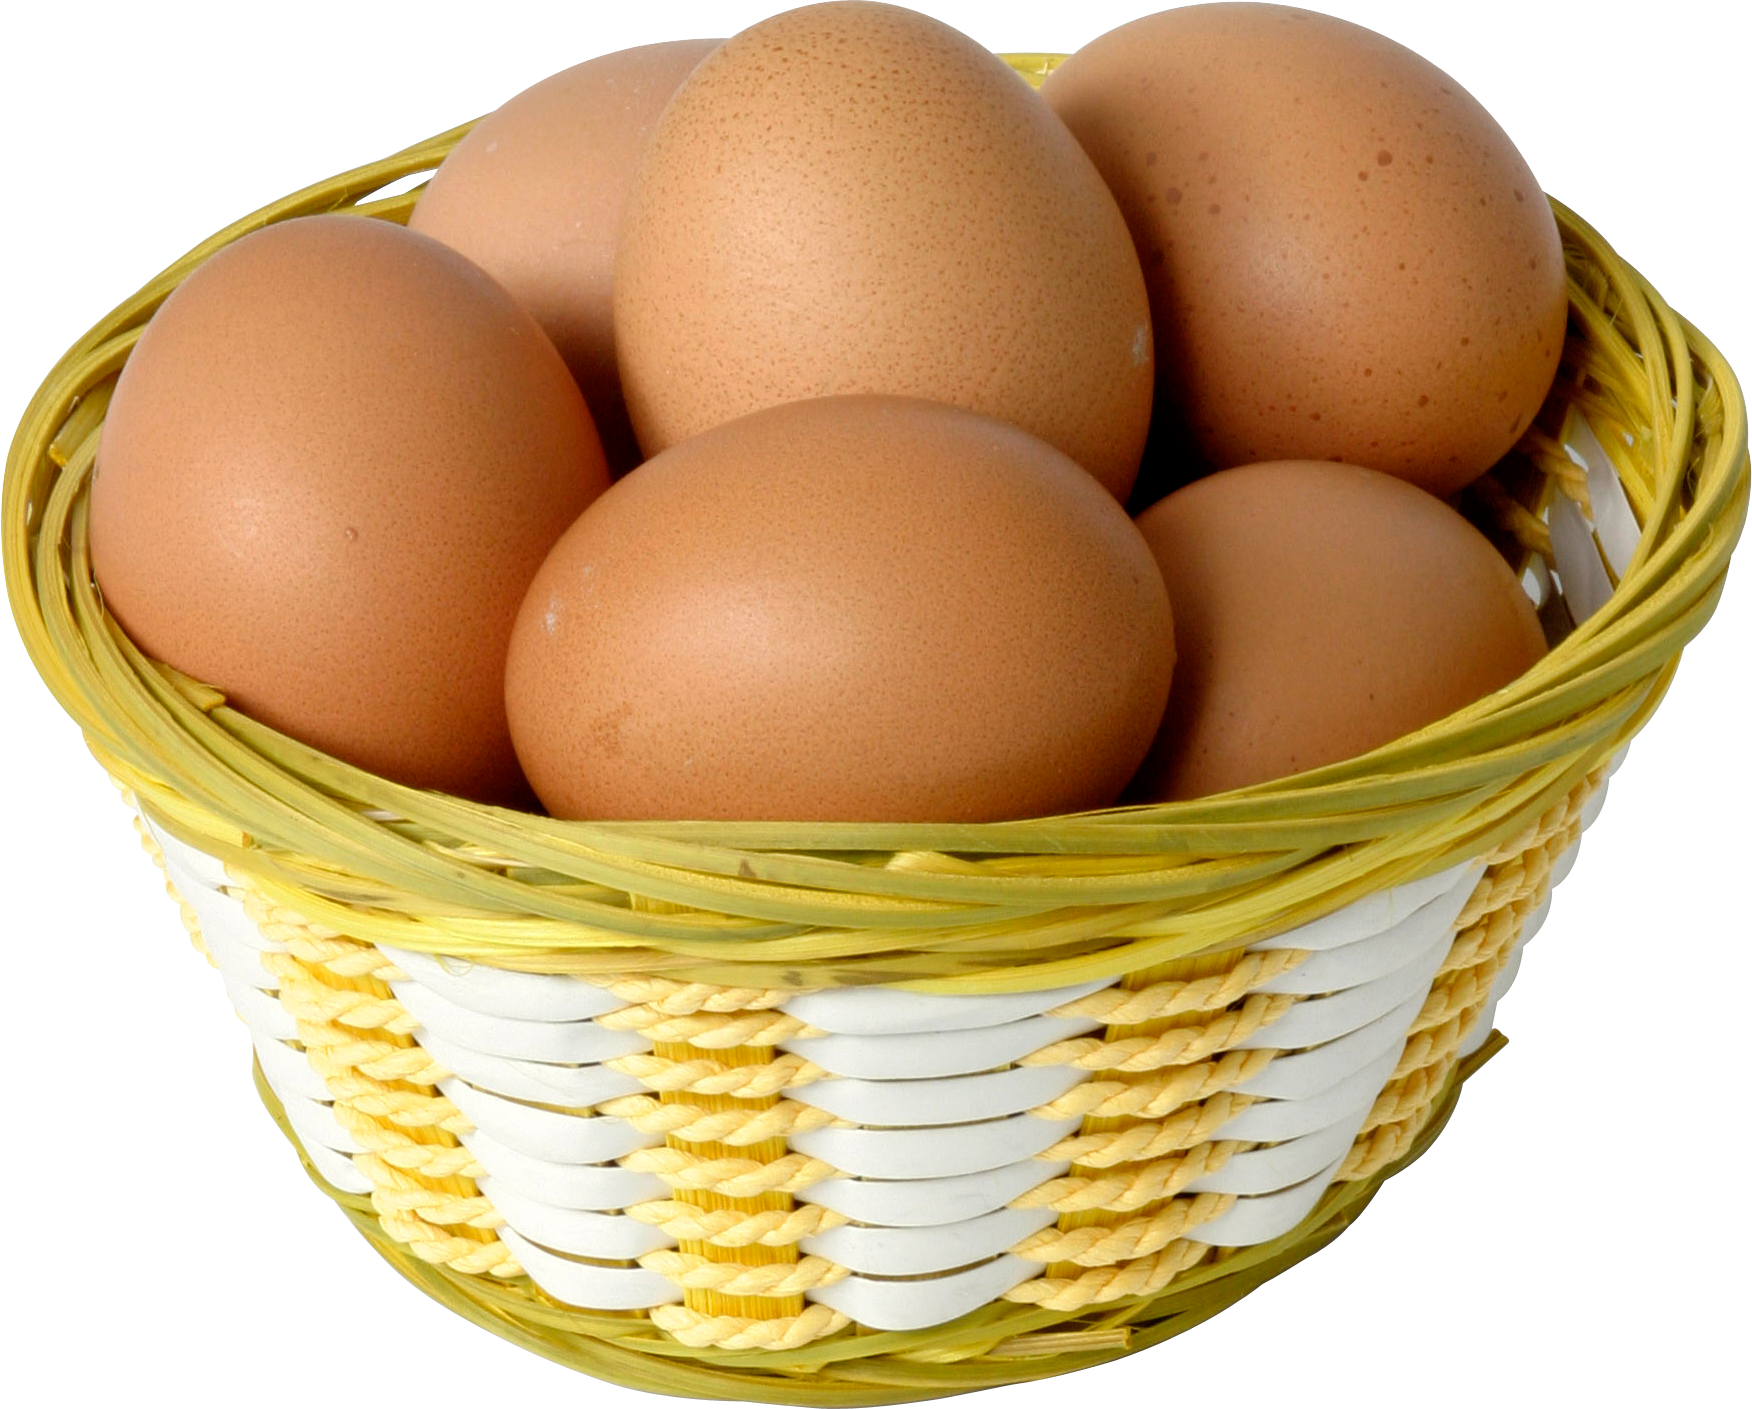 Eggs in a Basket PNG Image